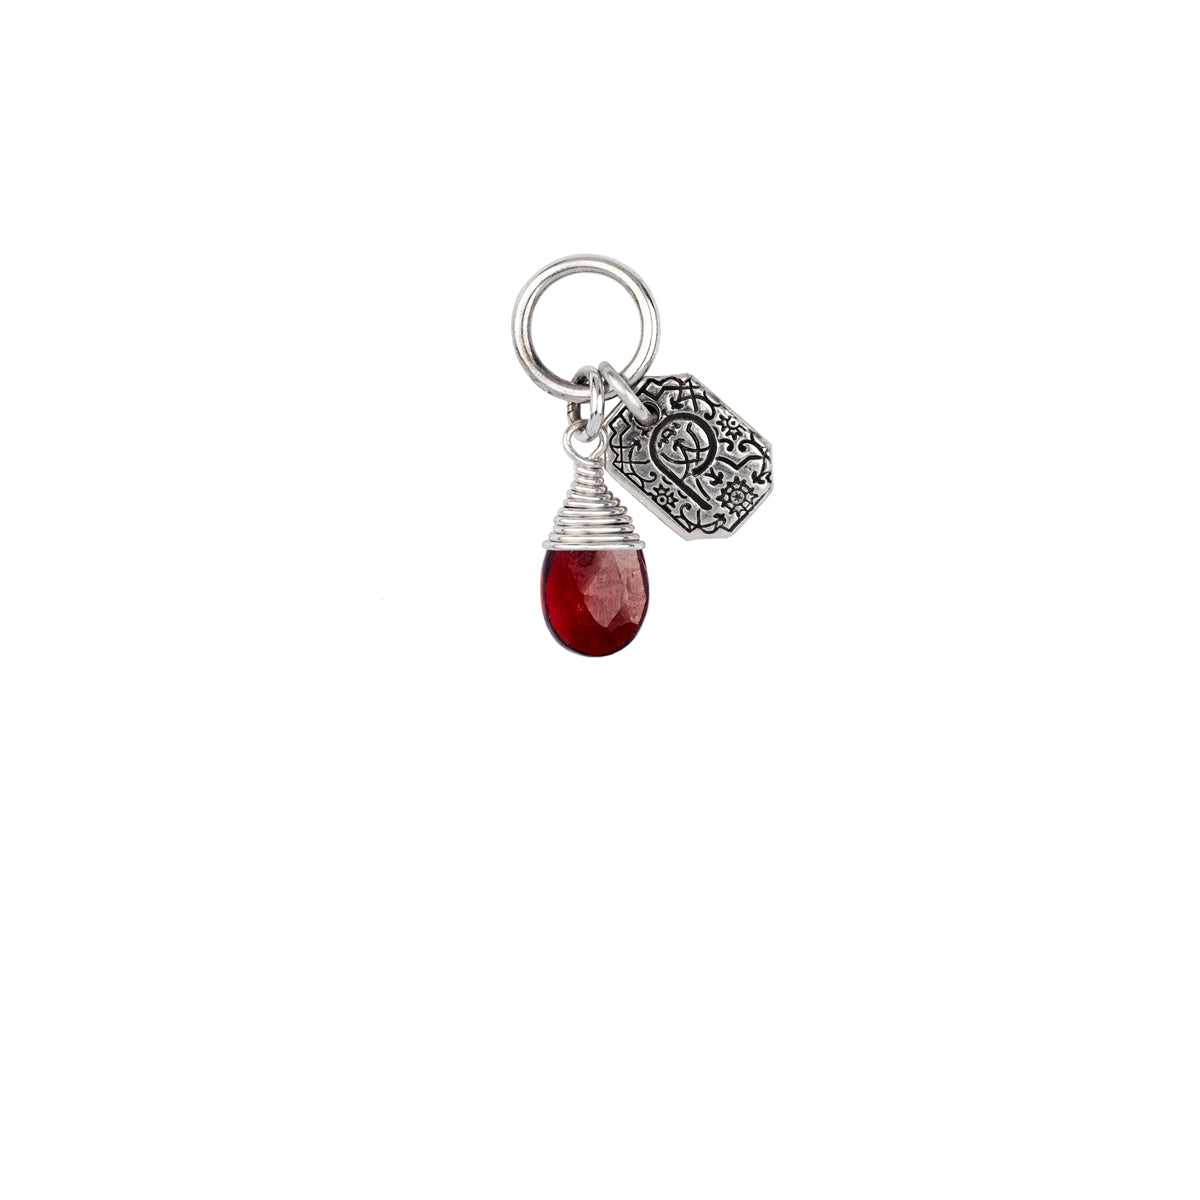 A signature sterling silver attraction charm capped with a garnet stone.